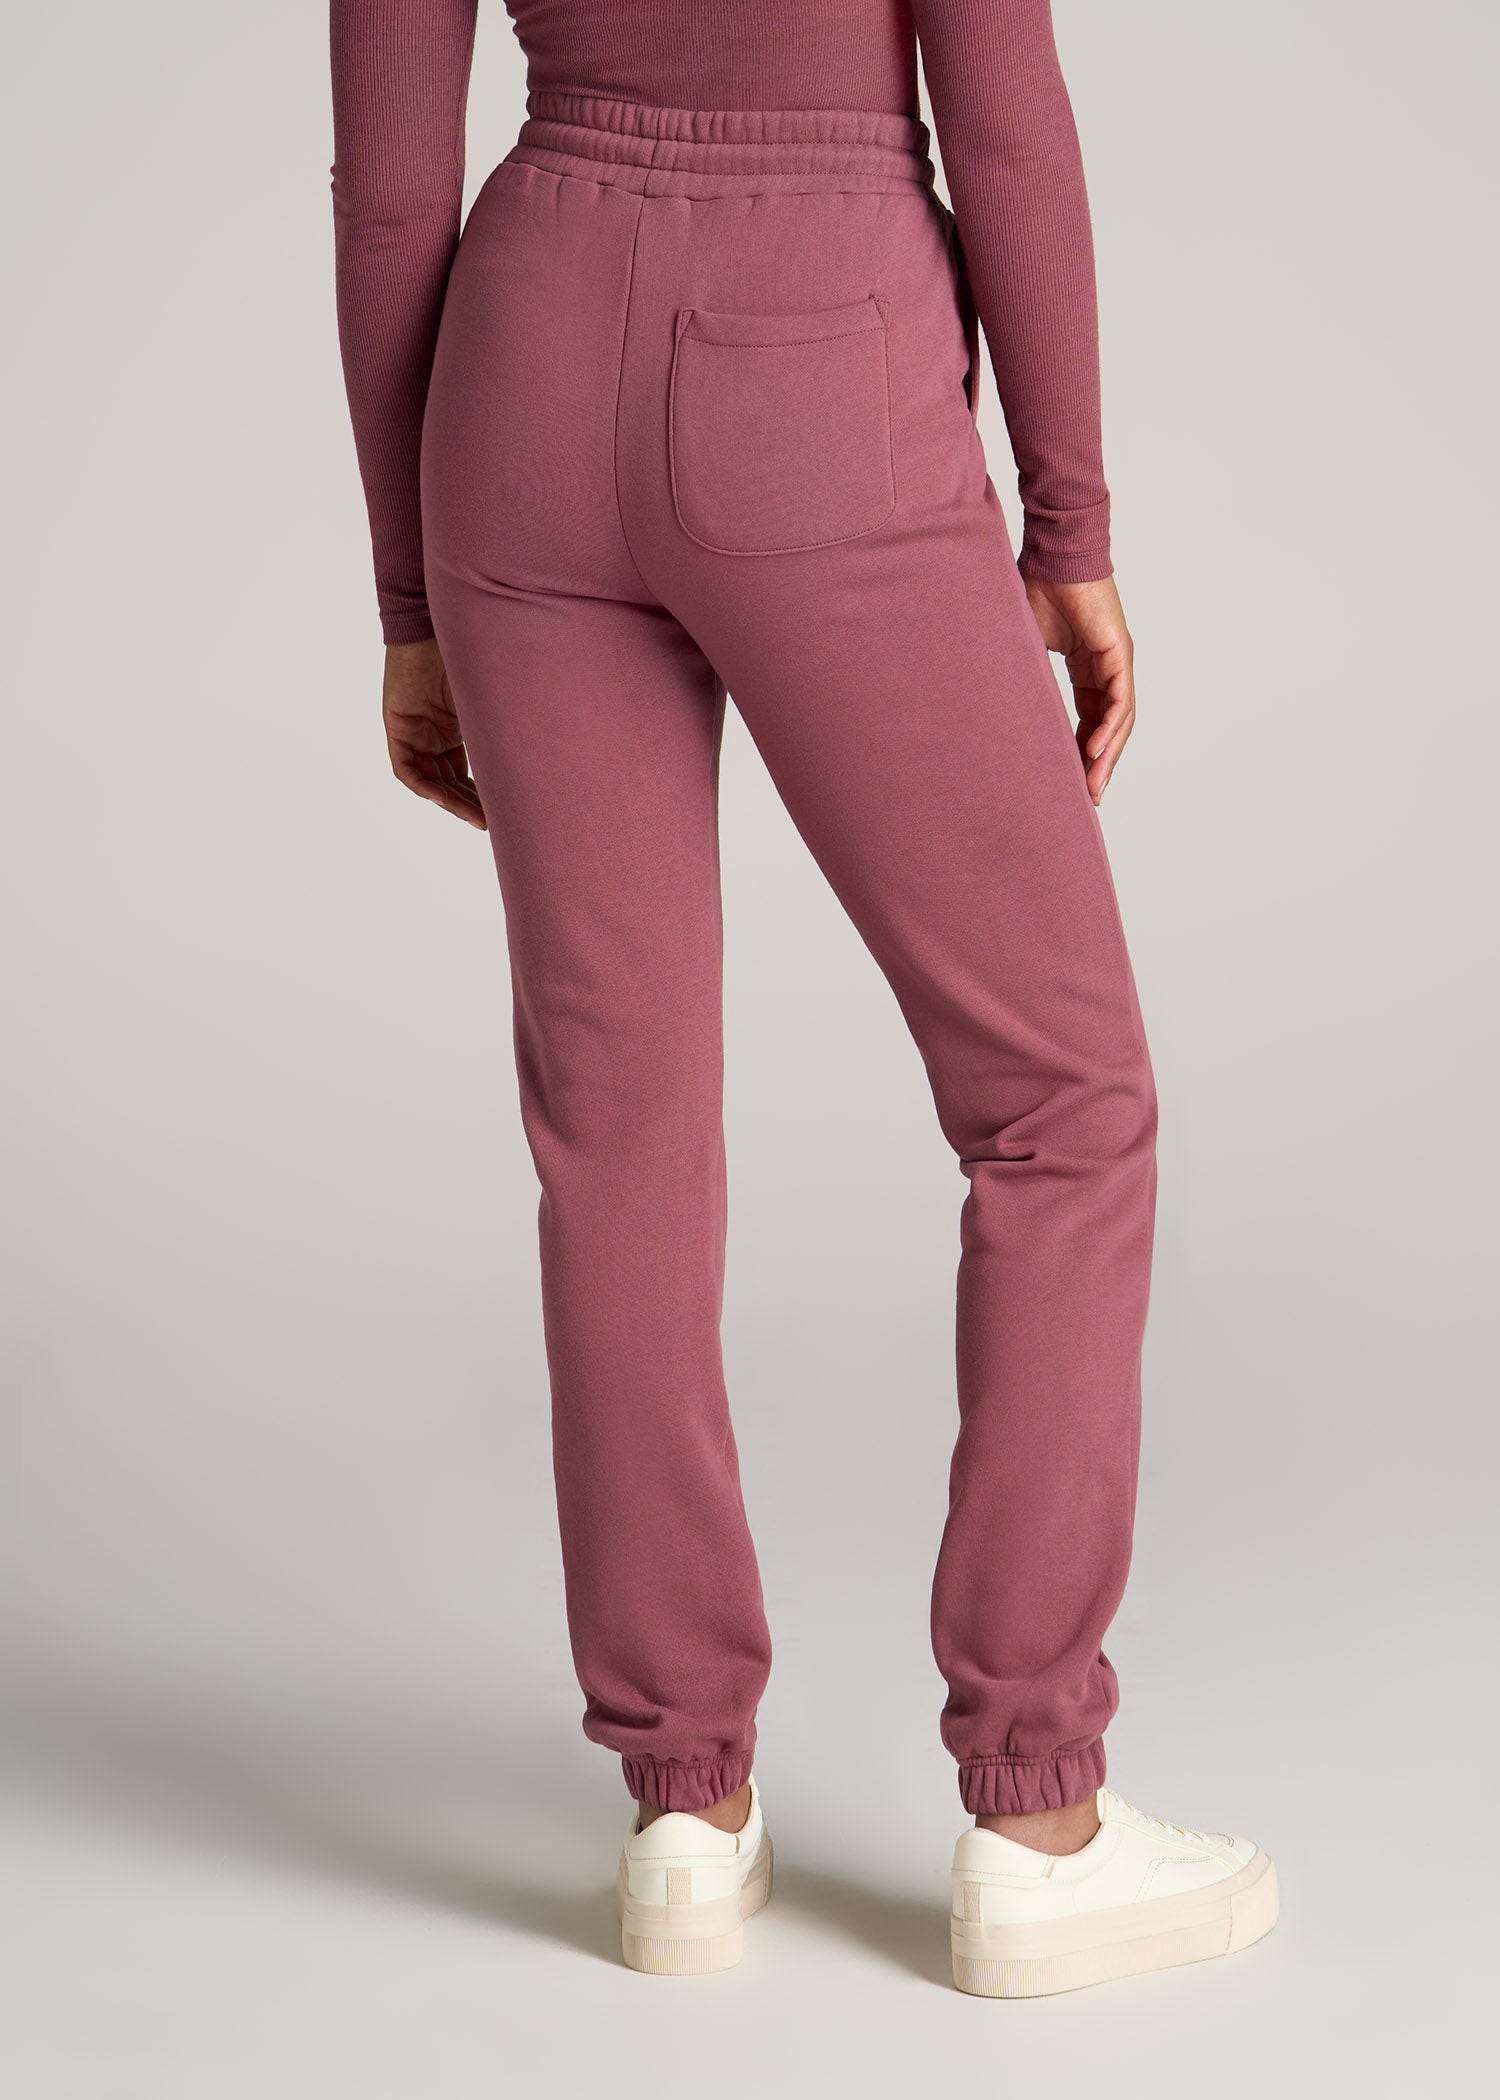 Women's Pants, Jeans, Joggers + Sweatpants, Urban Outfitters